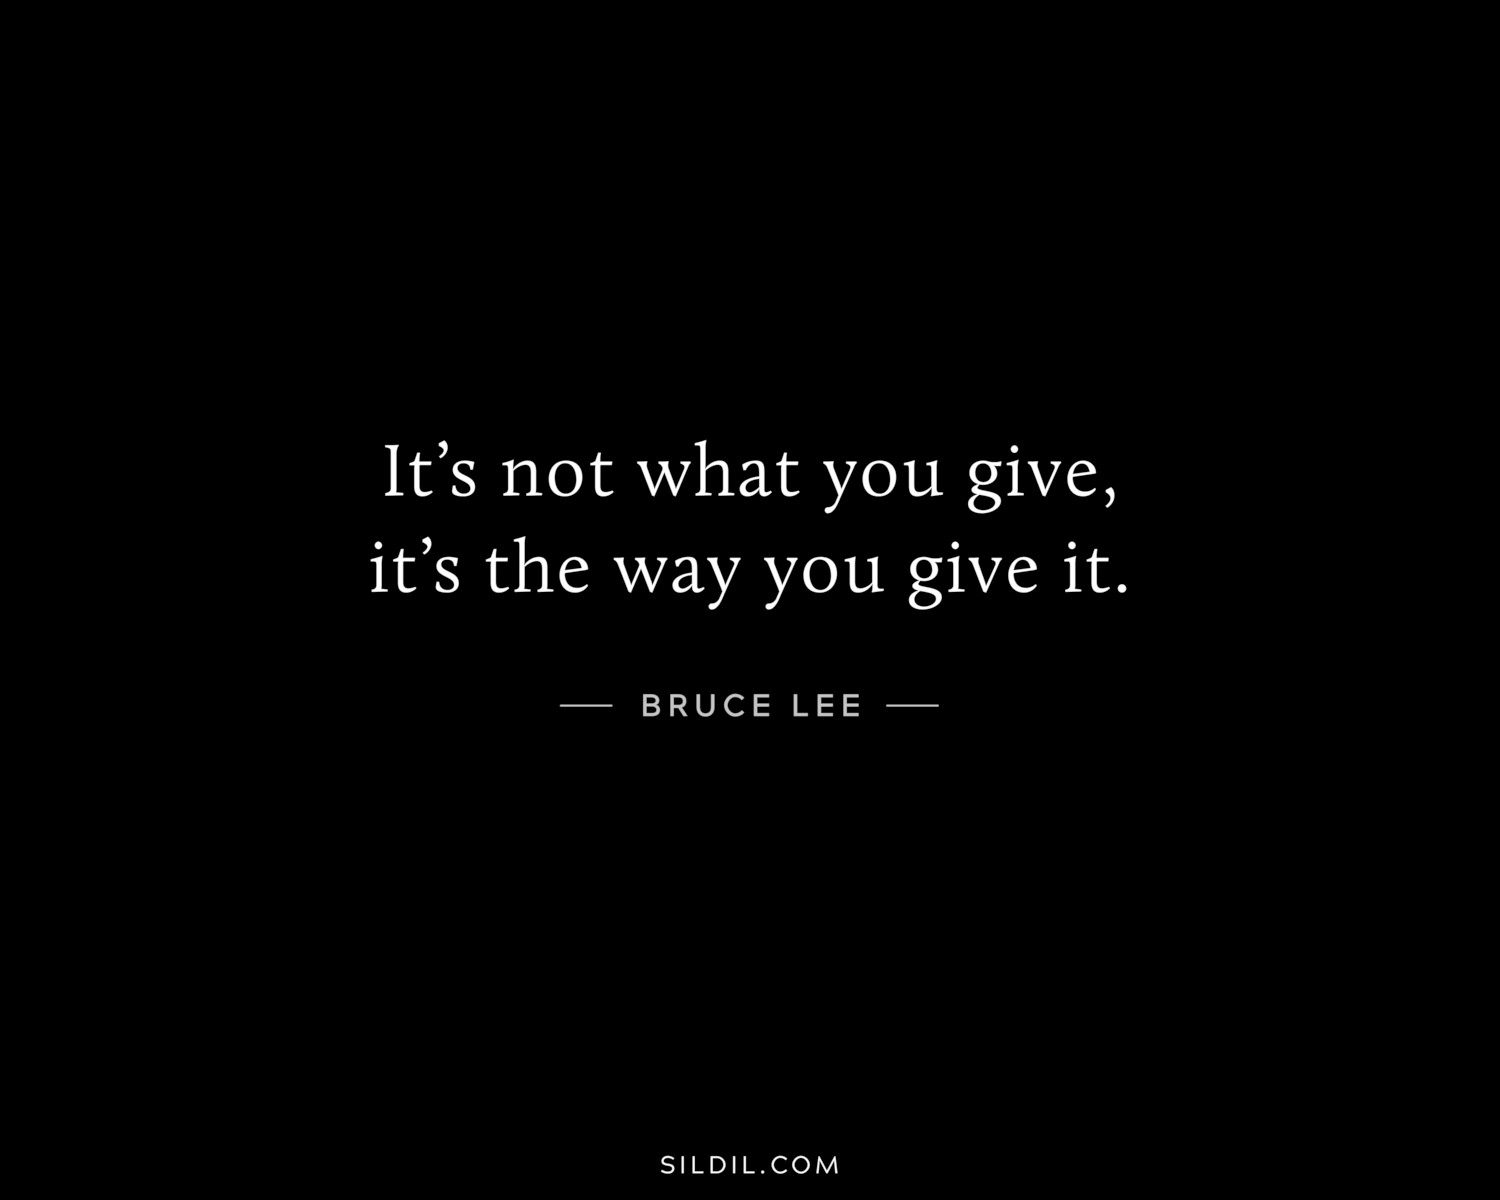 It’s not what you give, it’s the way you give it.